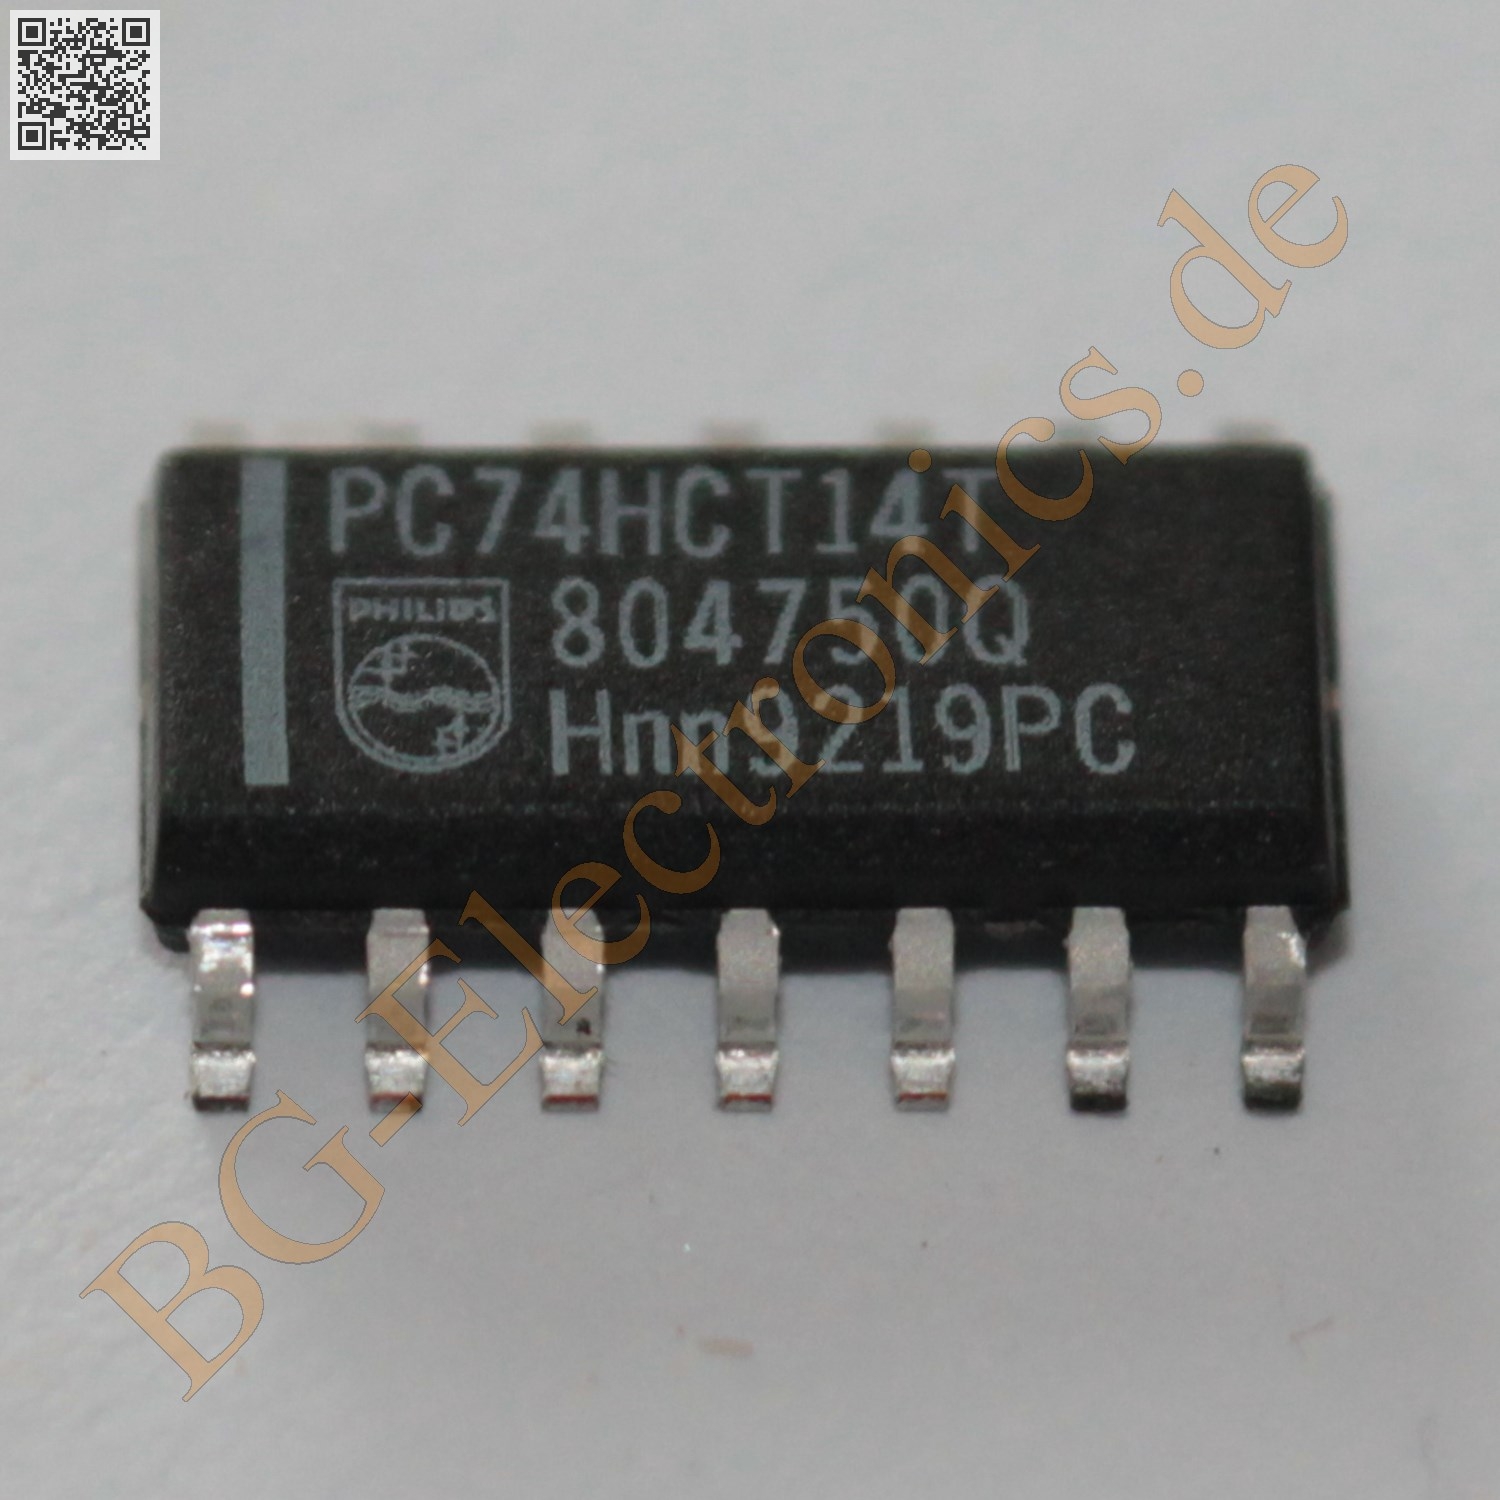 PC74HCT14T